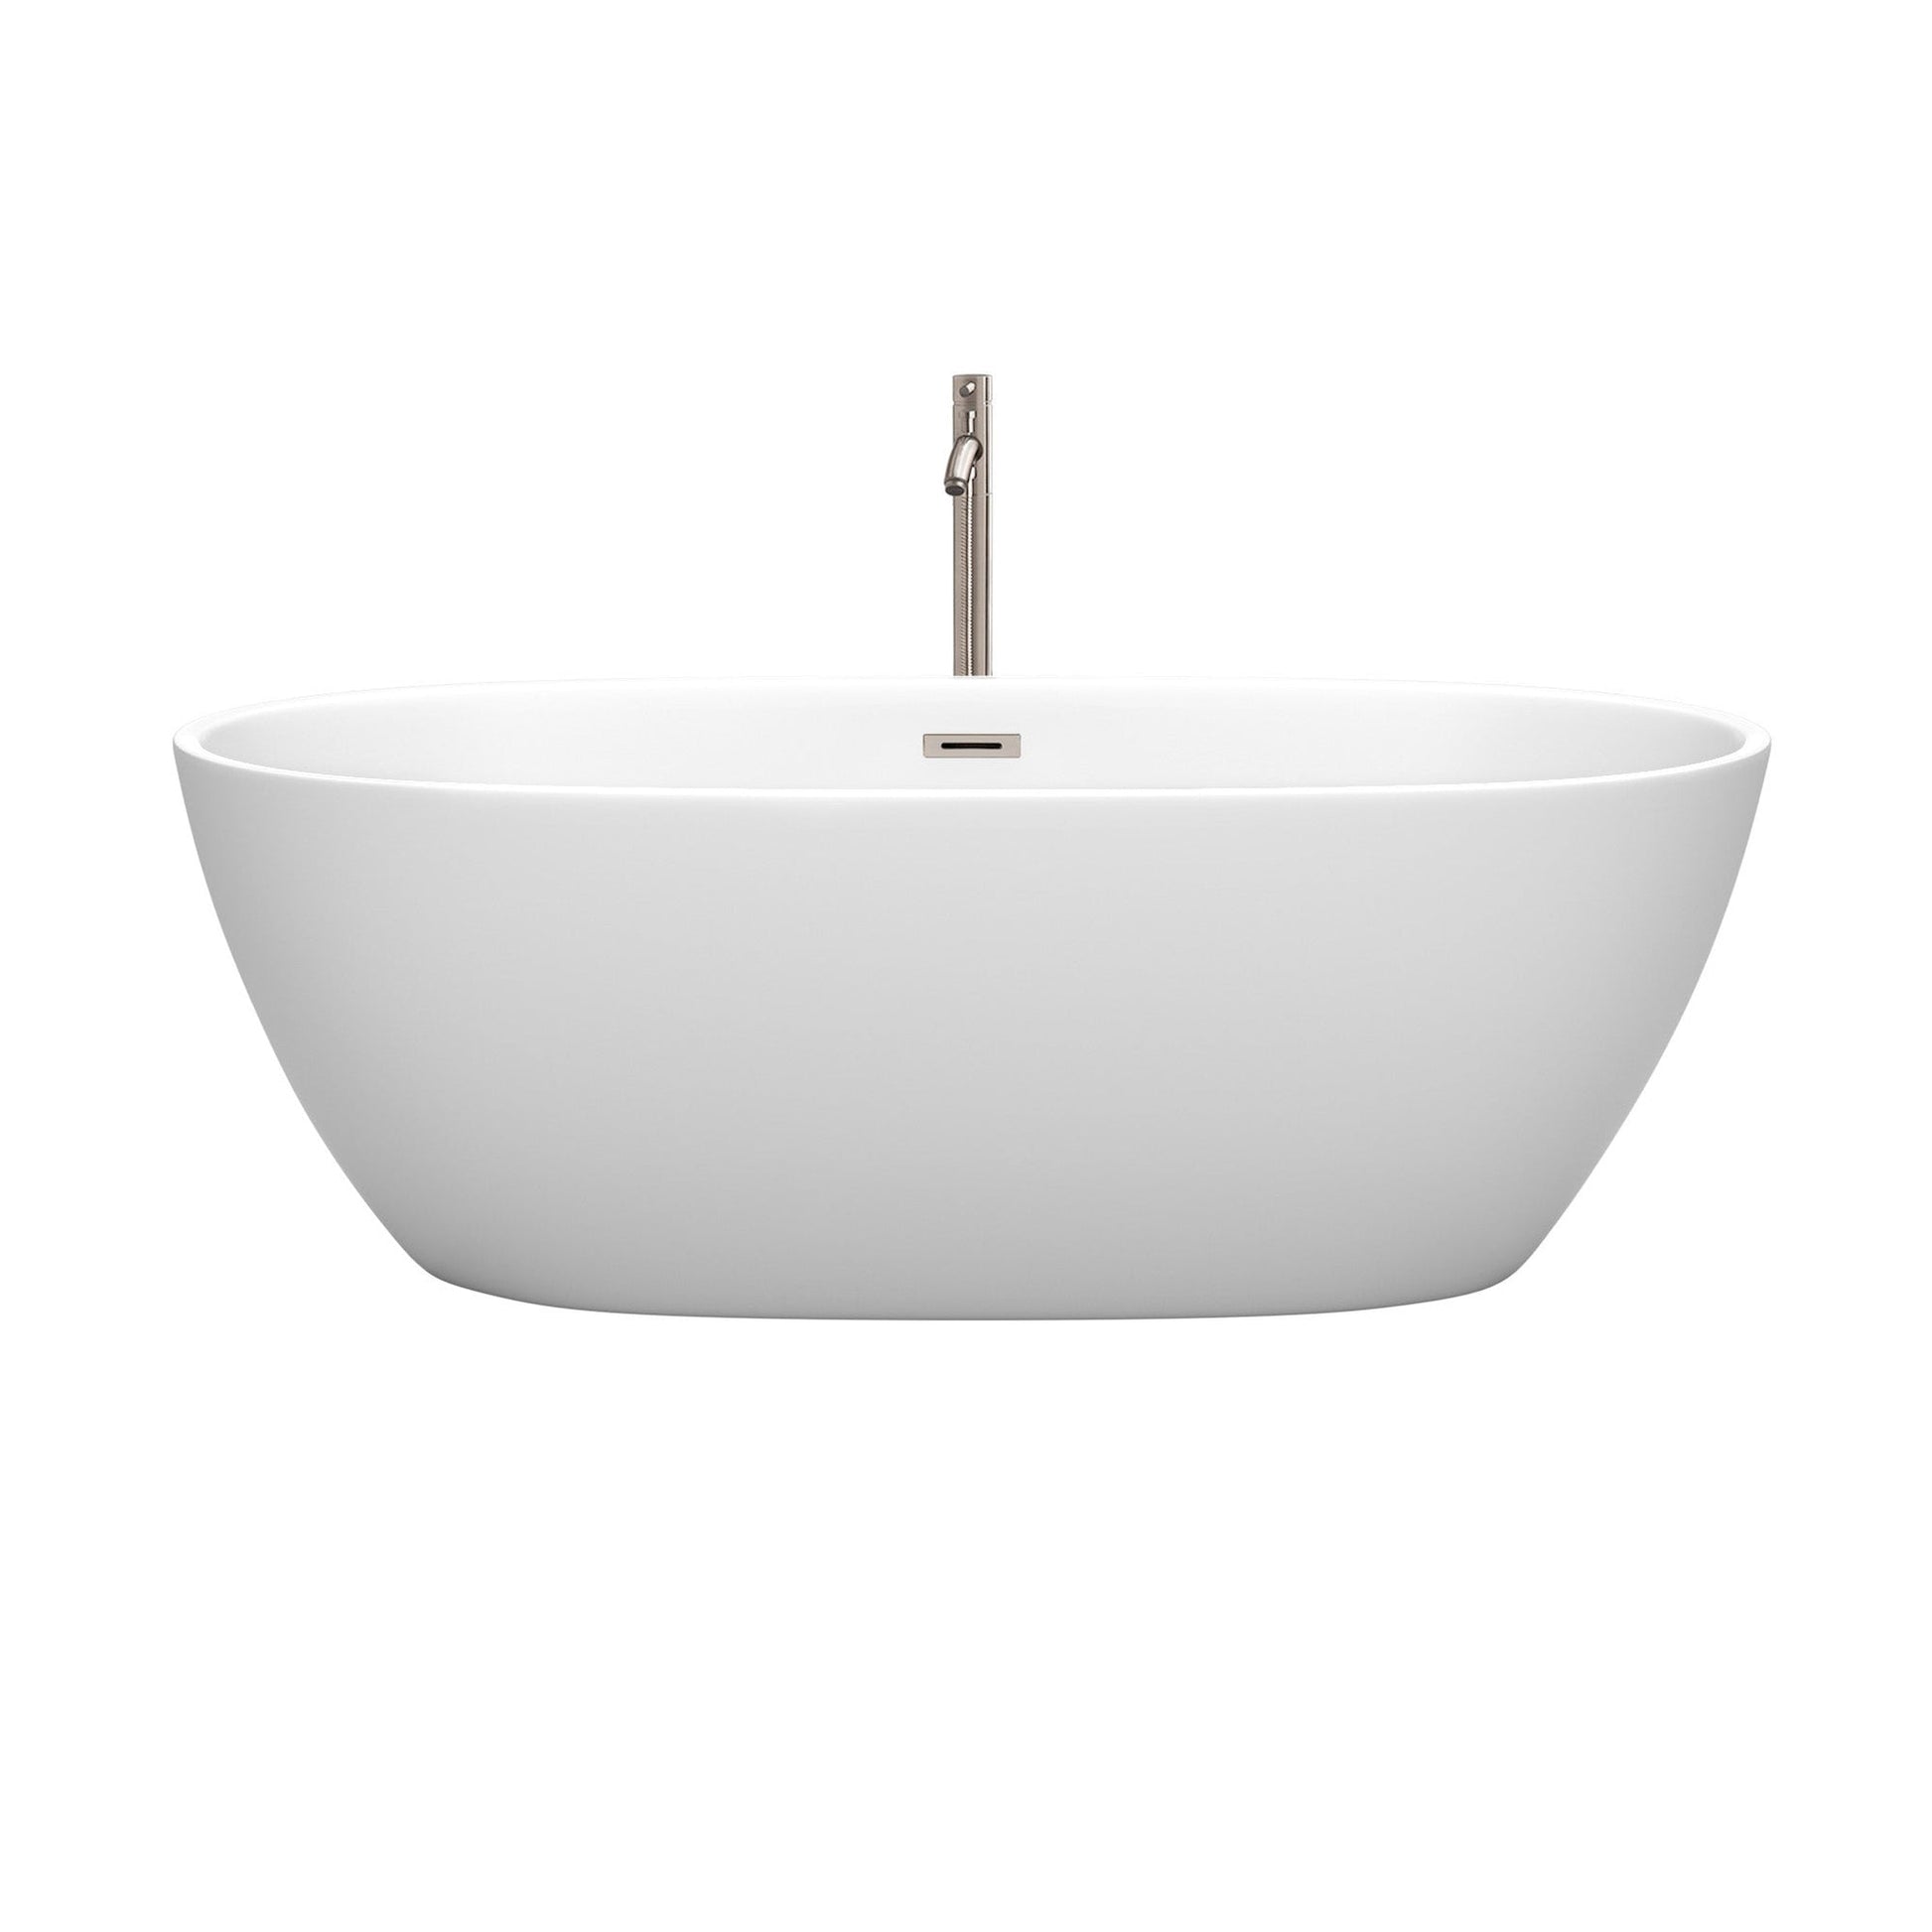 Wyndham Collection Juno 67" Freestanding Bathtub in Matte White With Floor Mounted Faucet, Drain and Overflow Trim in Brushed Nickel